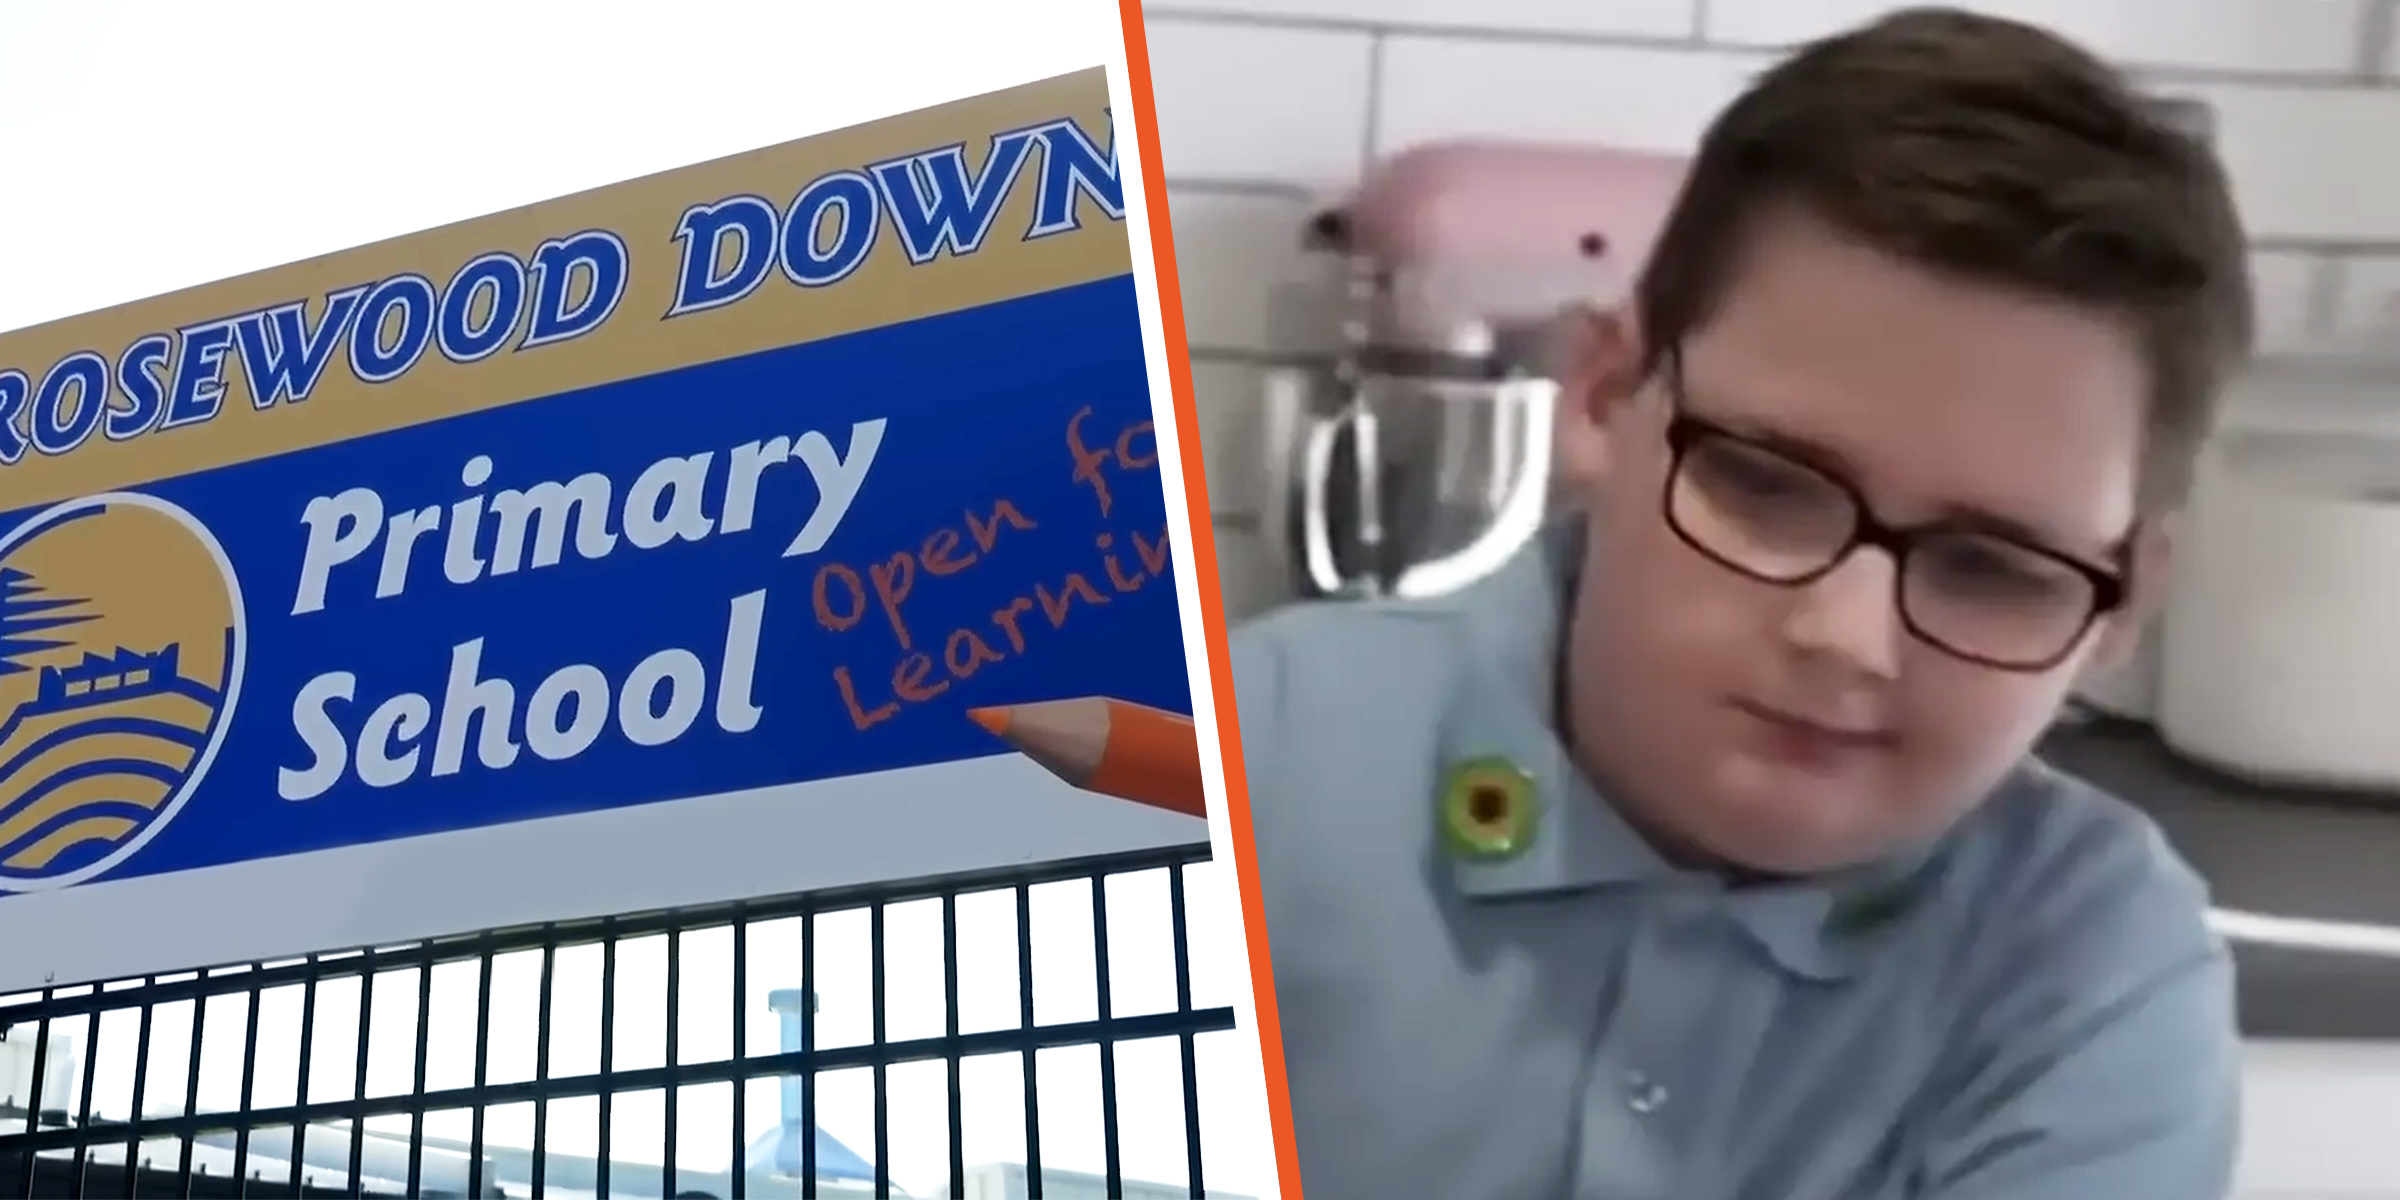 A Rosewood Downs Primary School sign.[Left] Max [Right] │Source: youtube.com/A Current Affair